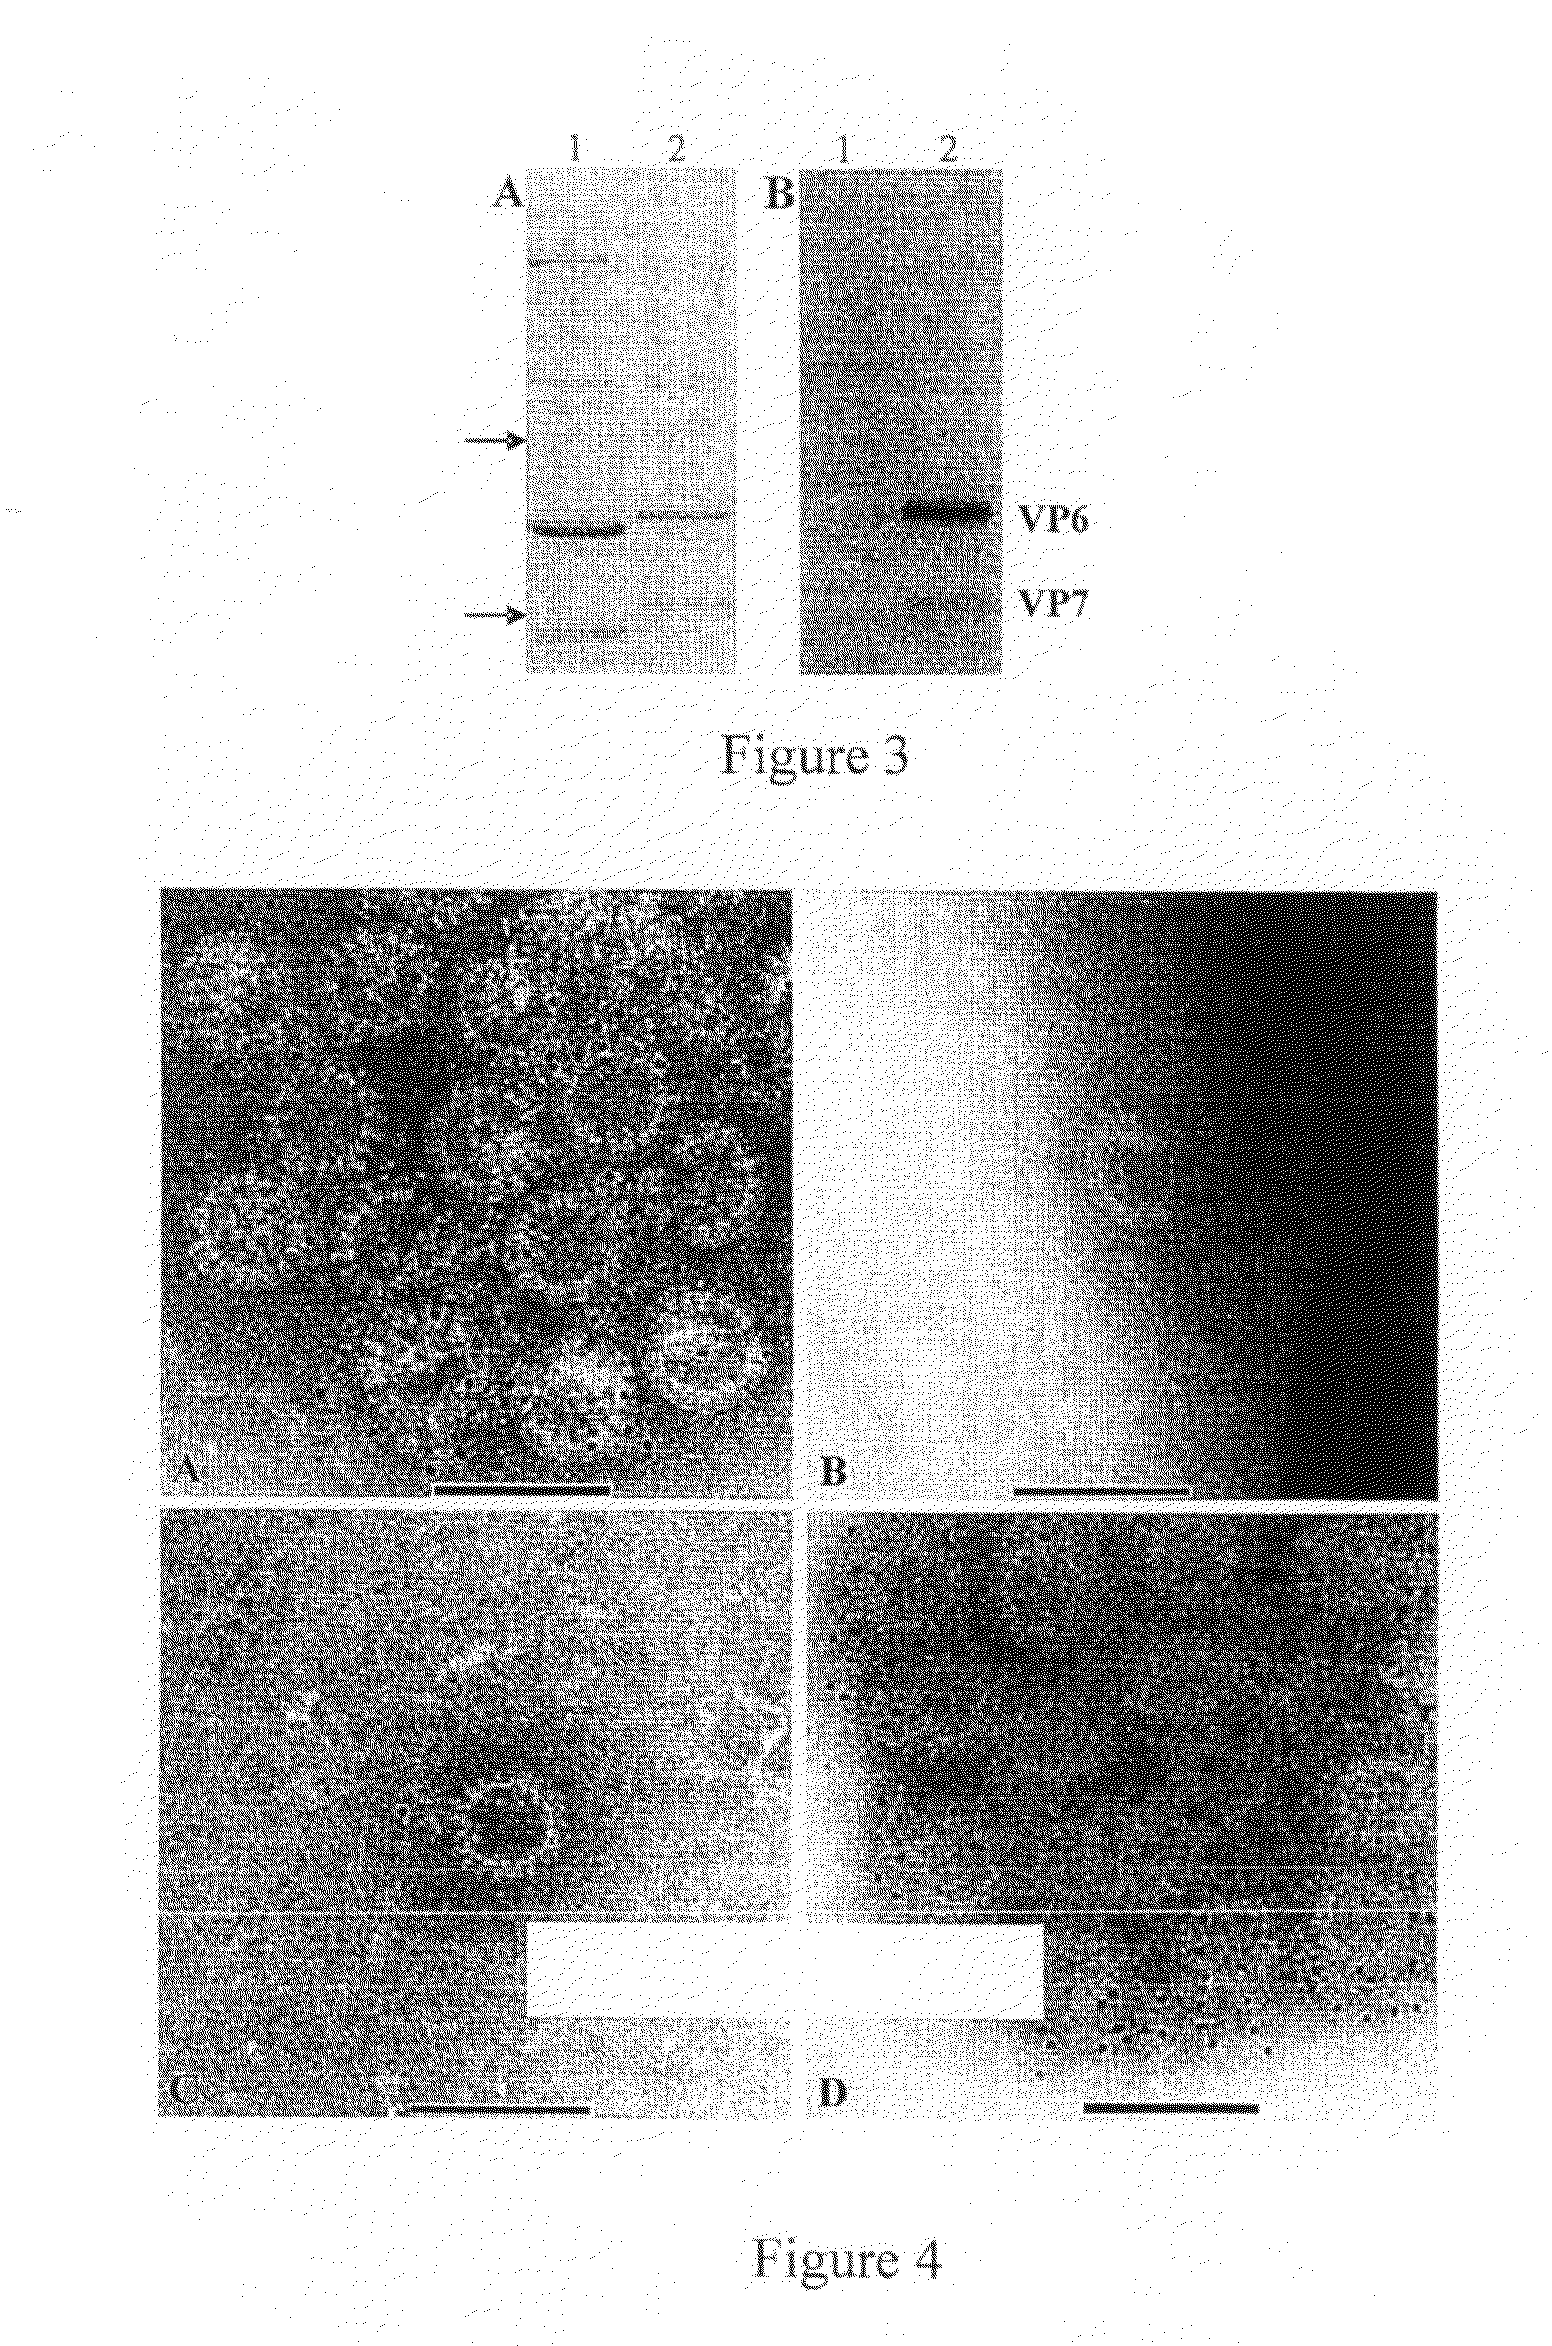 Expression and assembly of human group c rotavirus-like particles and uses thereof